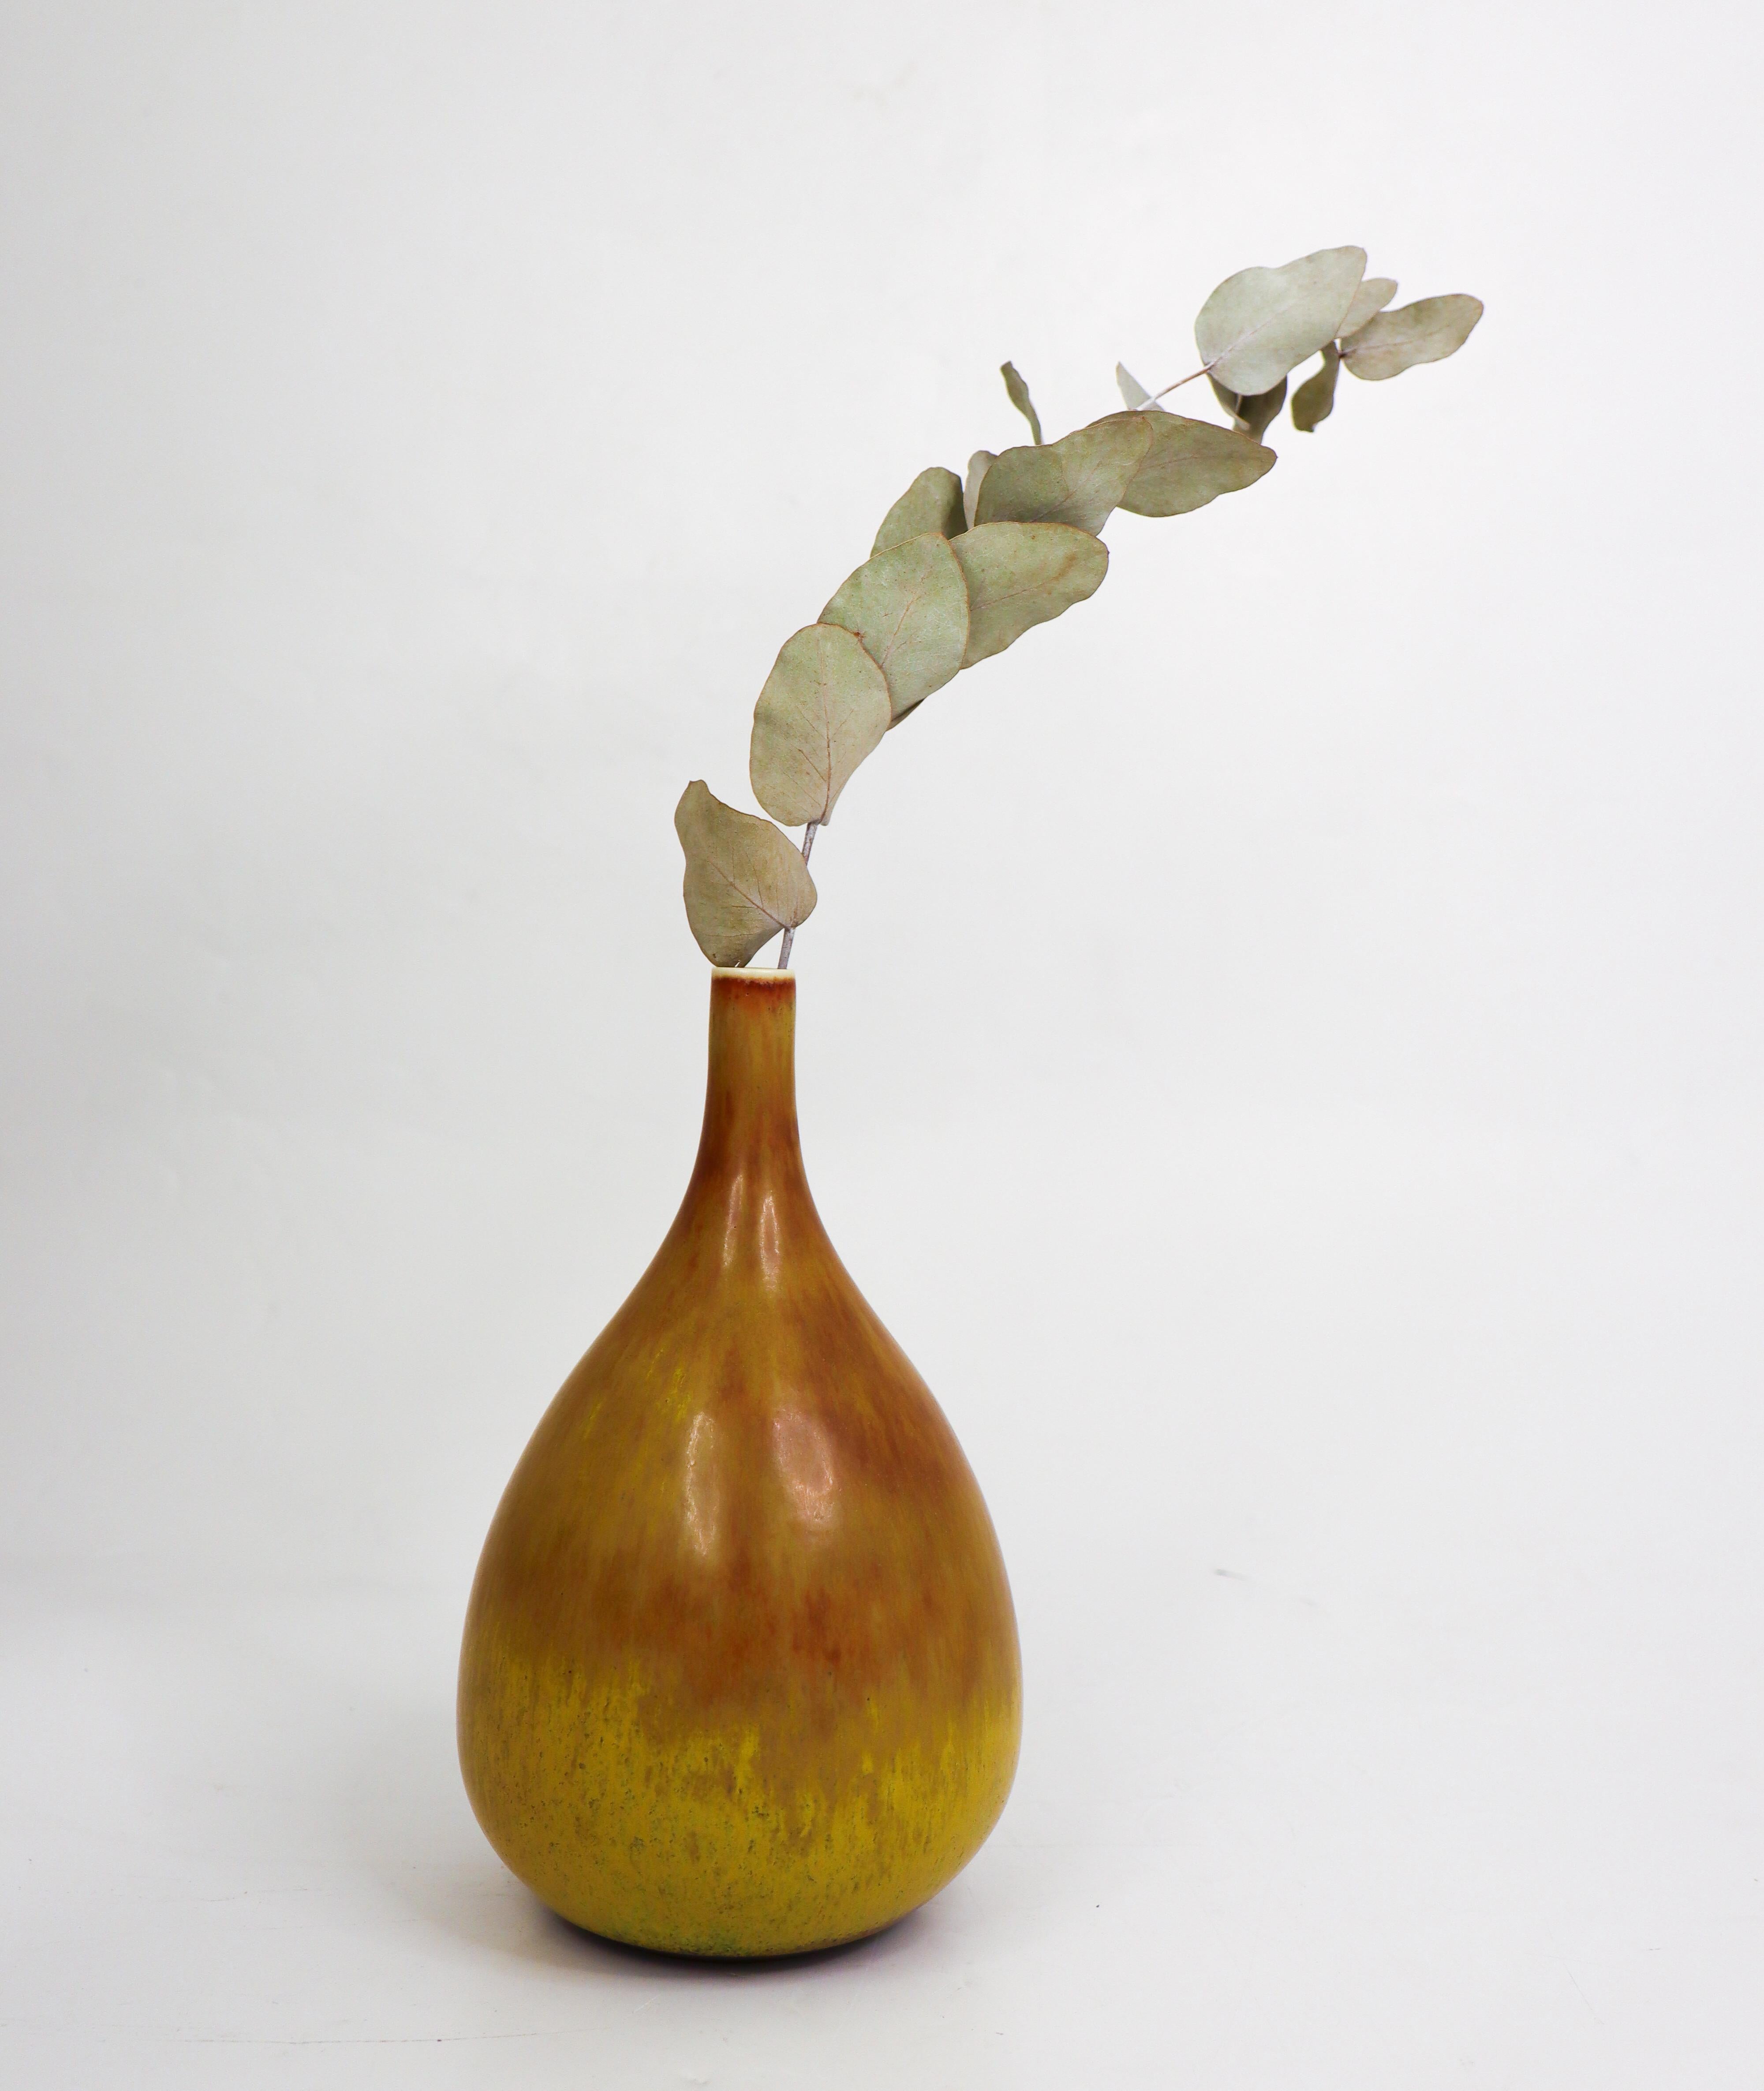 A unique brown and yellow vase designed by Carl-Harry Stålhane at Rörstrand. The vase is 19 cm (7.6